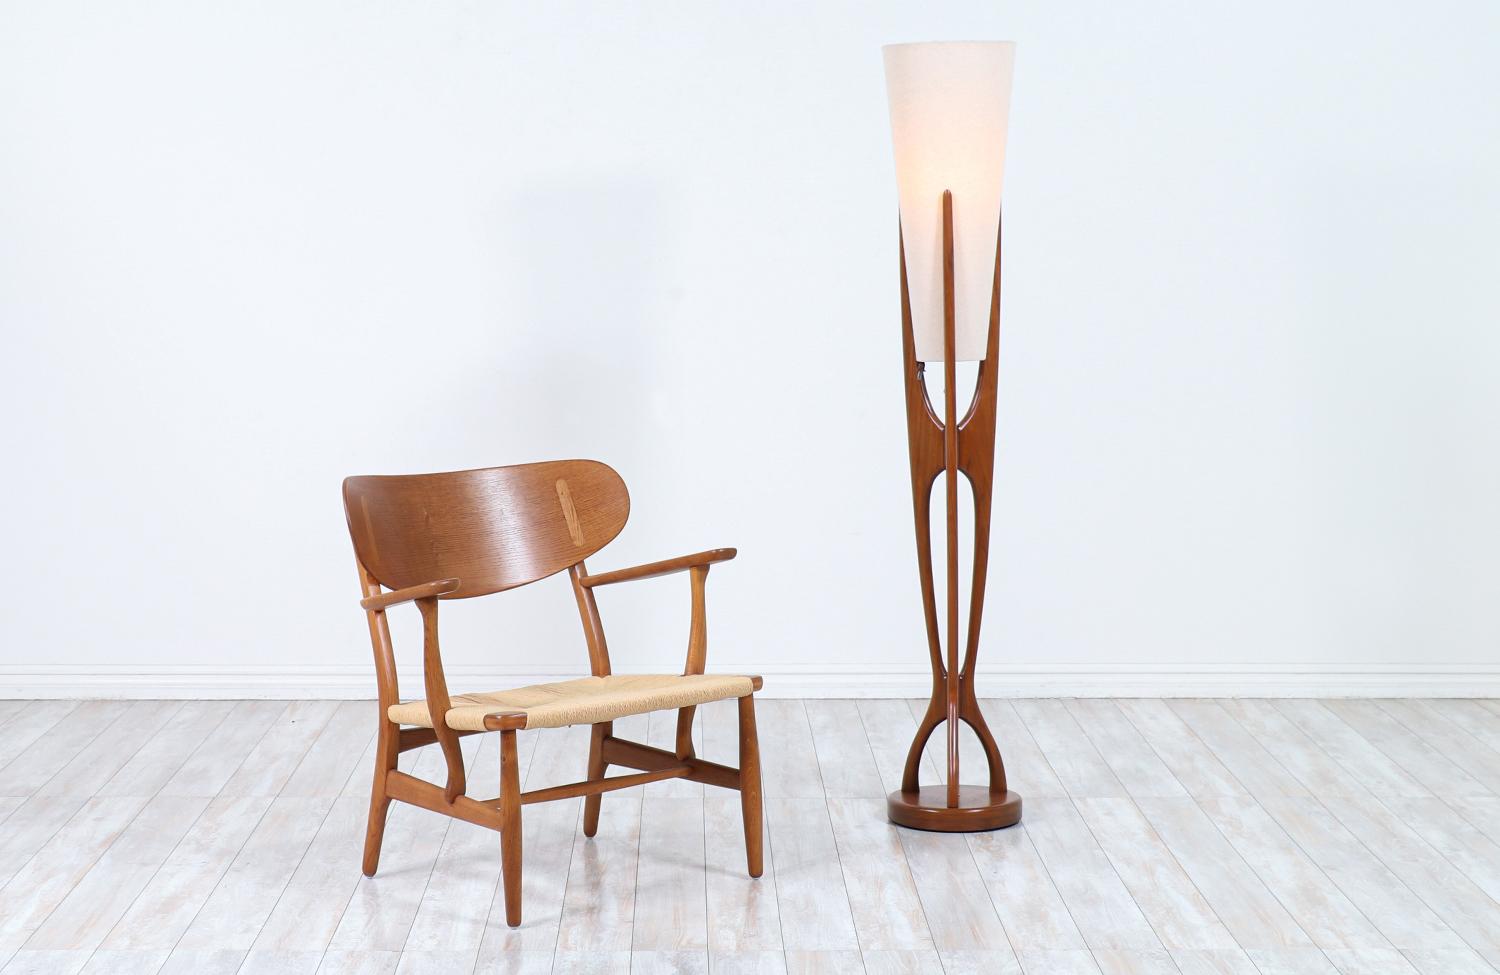 Stunning sculpted modern floor lamp designed and manufactured by Modeline of California in the United States circa 1960s. This rare floor lamp is comprised of a carved walnut wood frame that connects from the top to the rounded base creating a